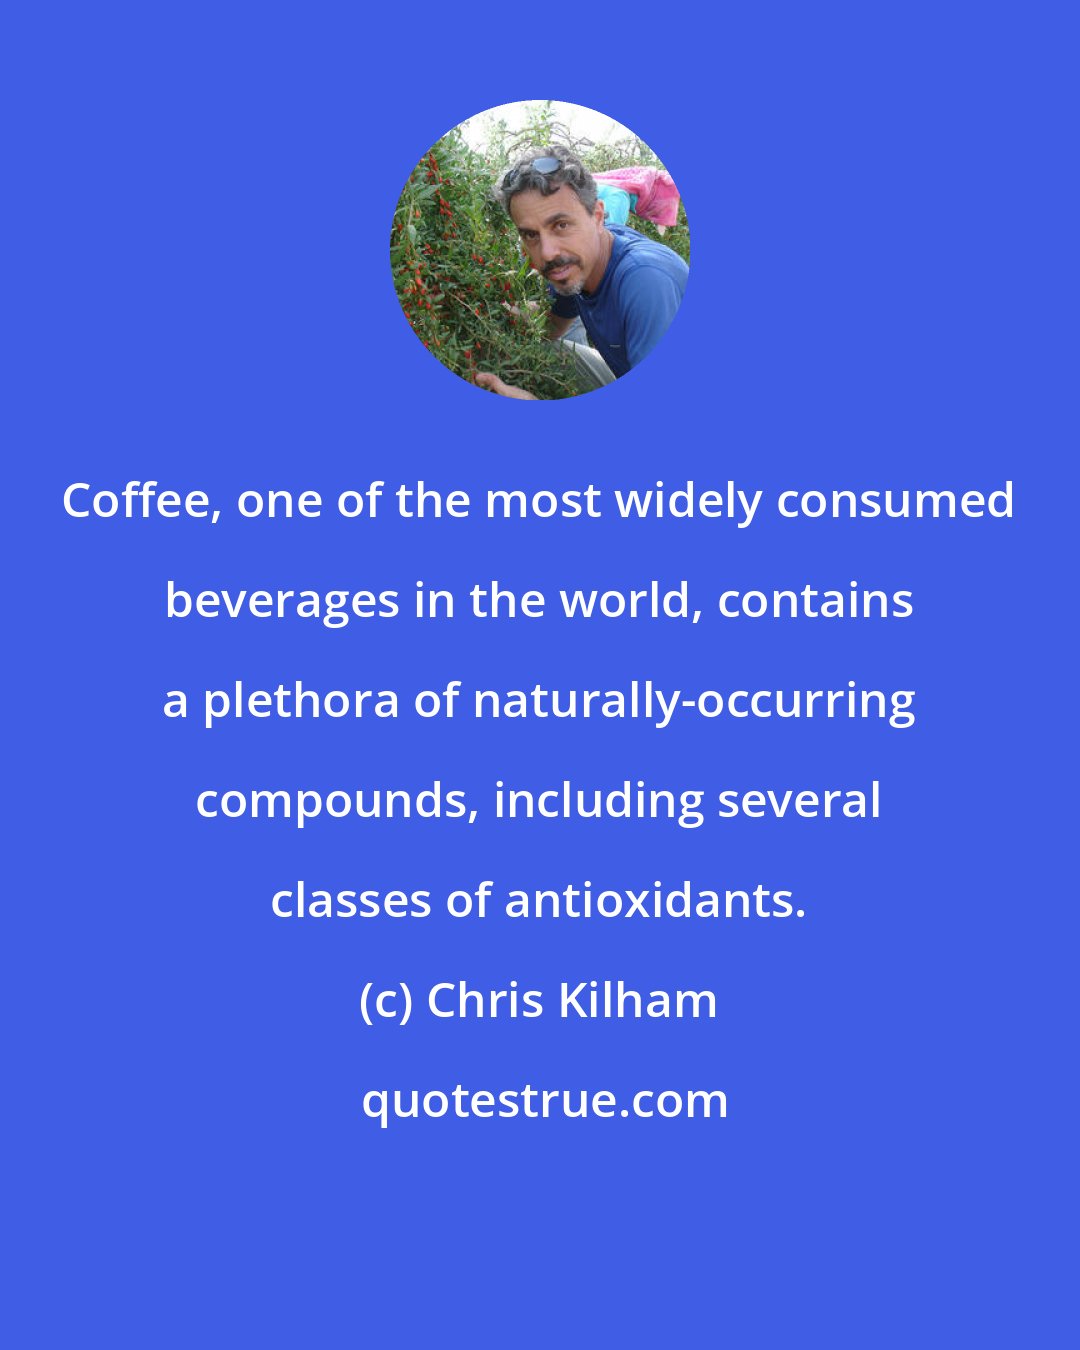 Chris Kilham: Coffee, one of the most widely consumed beverages in the world, contains a plethora of naturally-occurring compounds, including several classes of antioxidants.